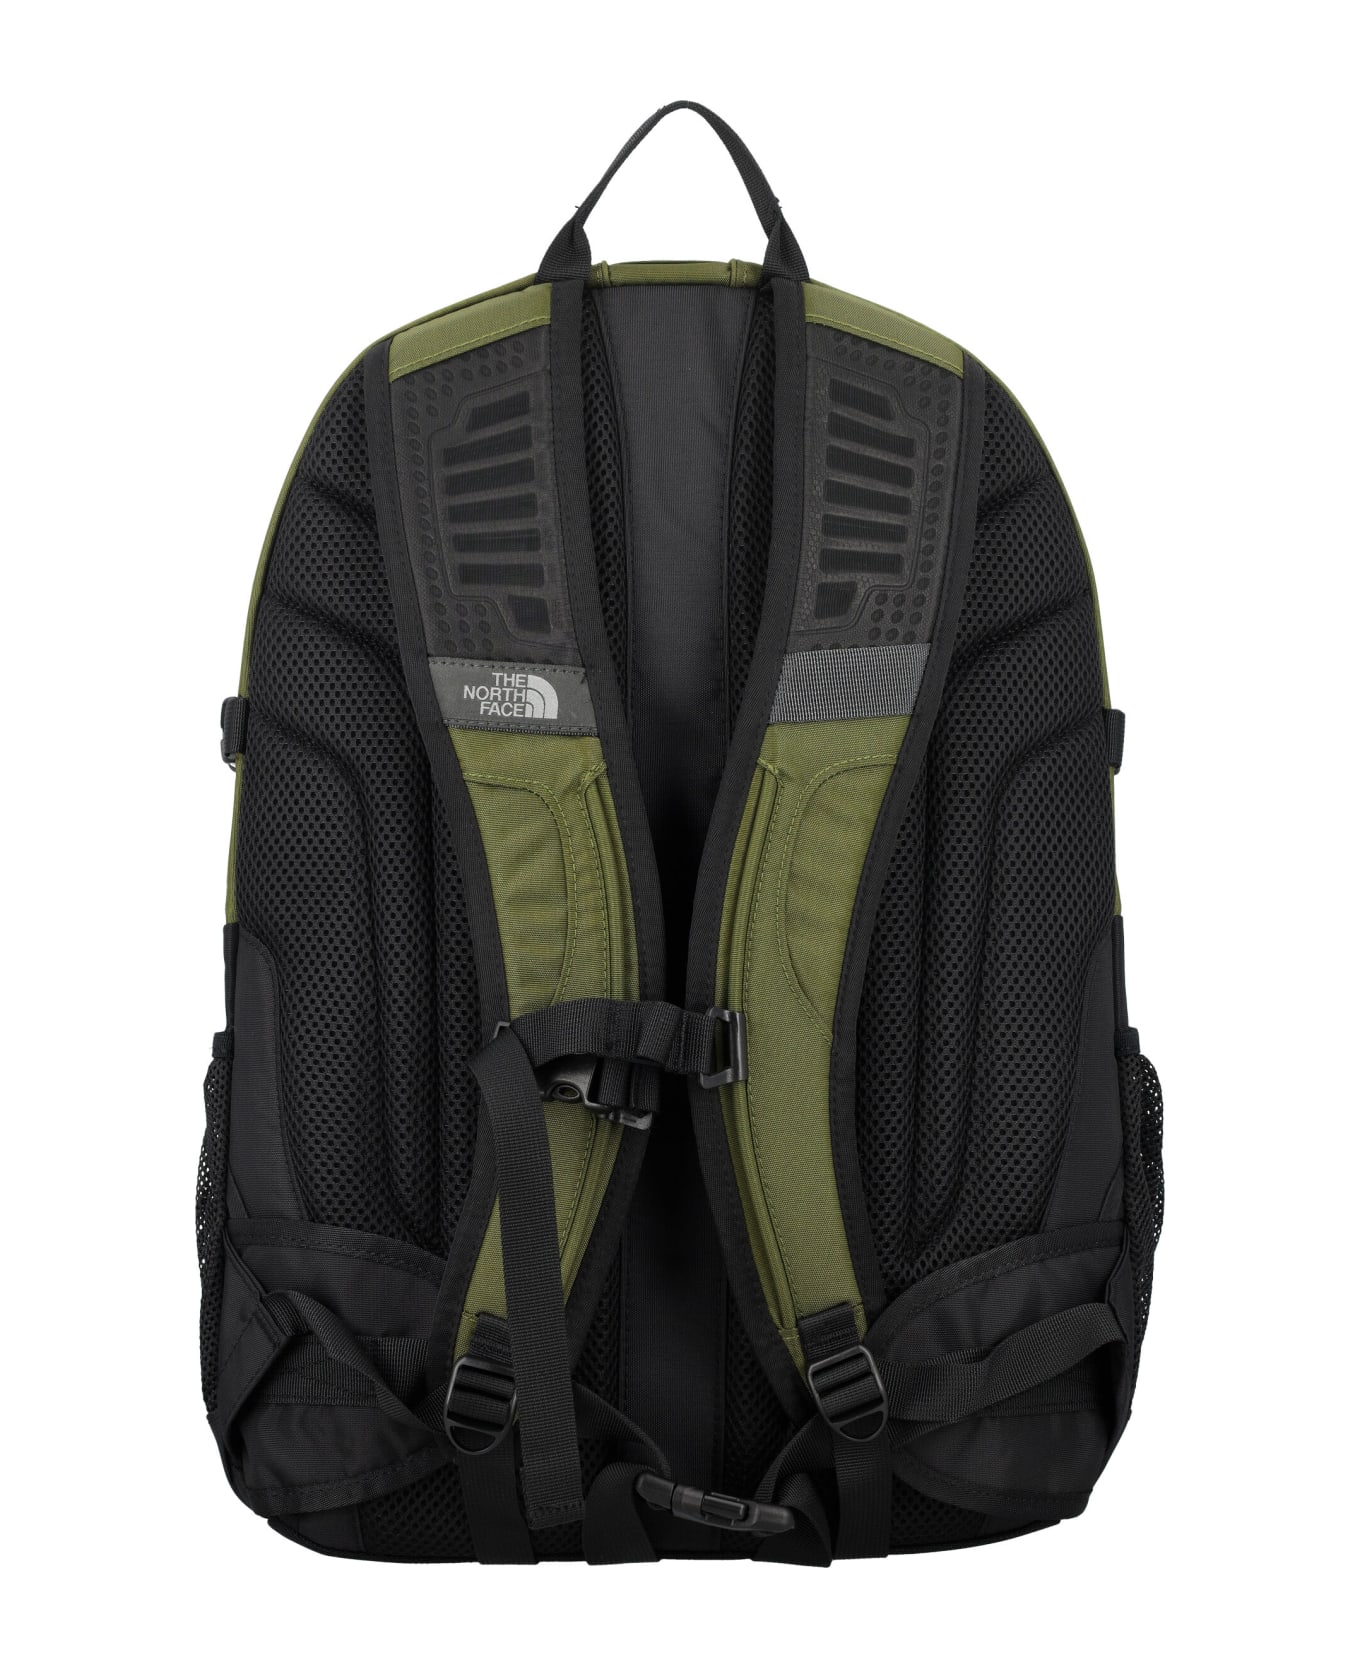 The North Face Borealis Classic Backpack - OLIVE